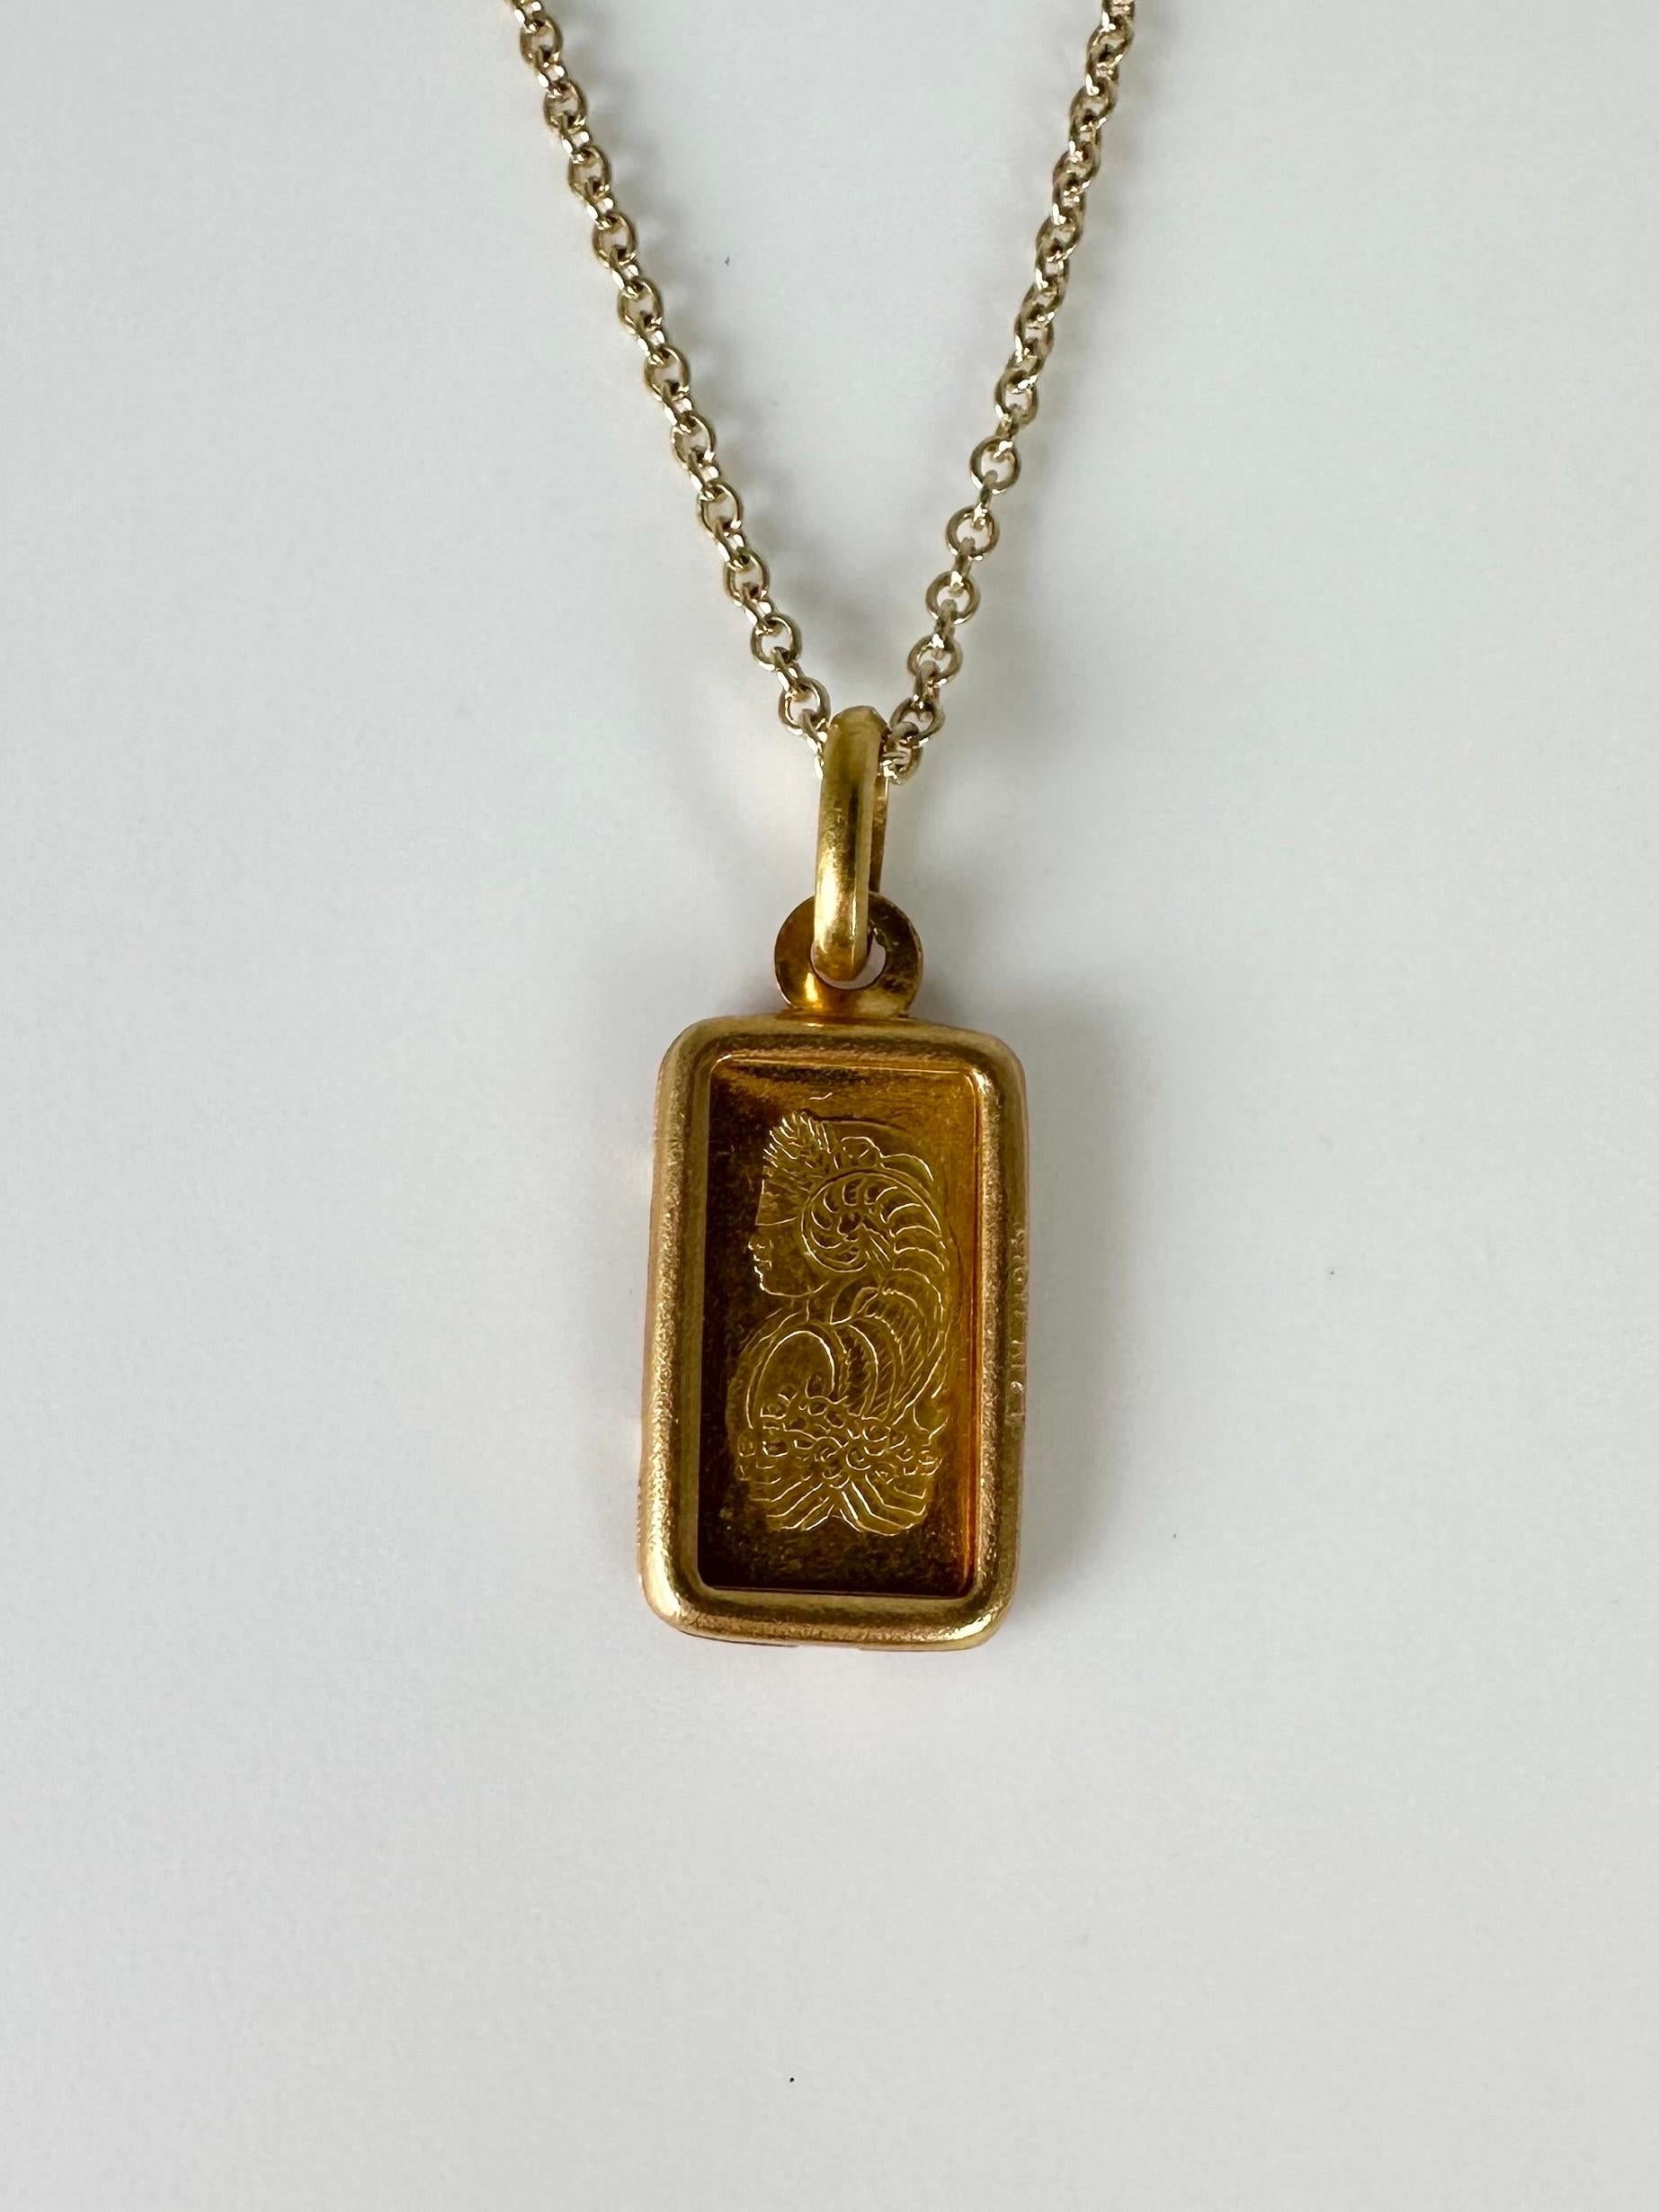 Gold pendant necklace with 18